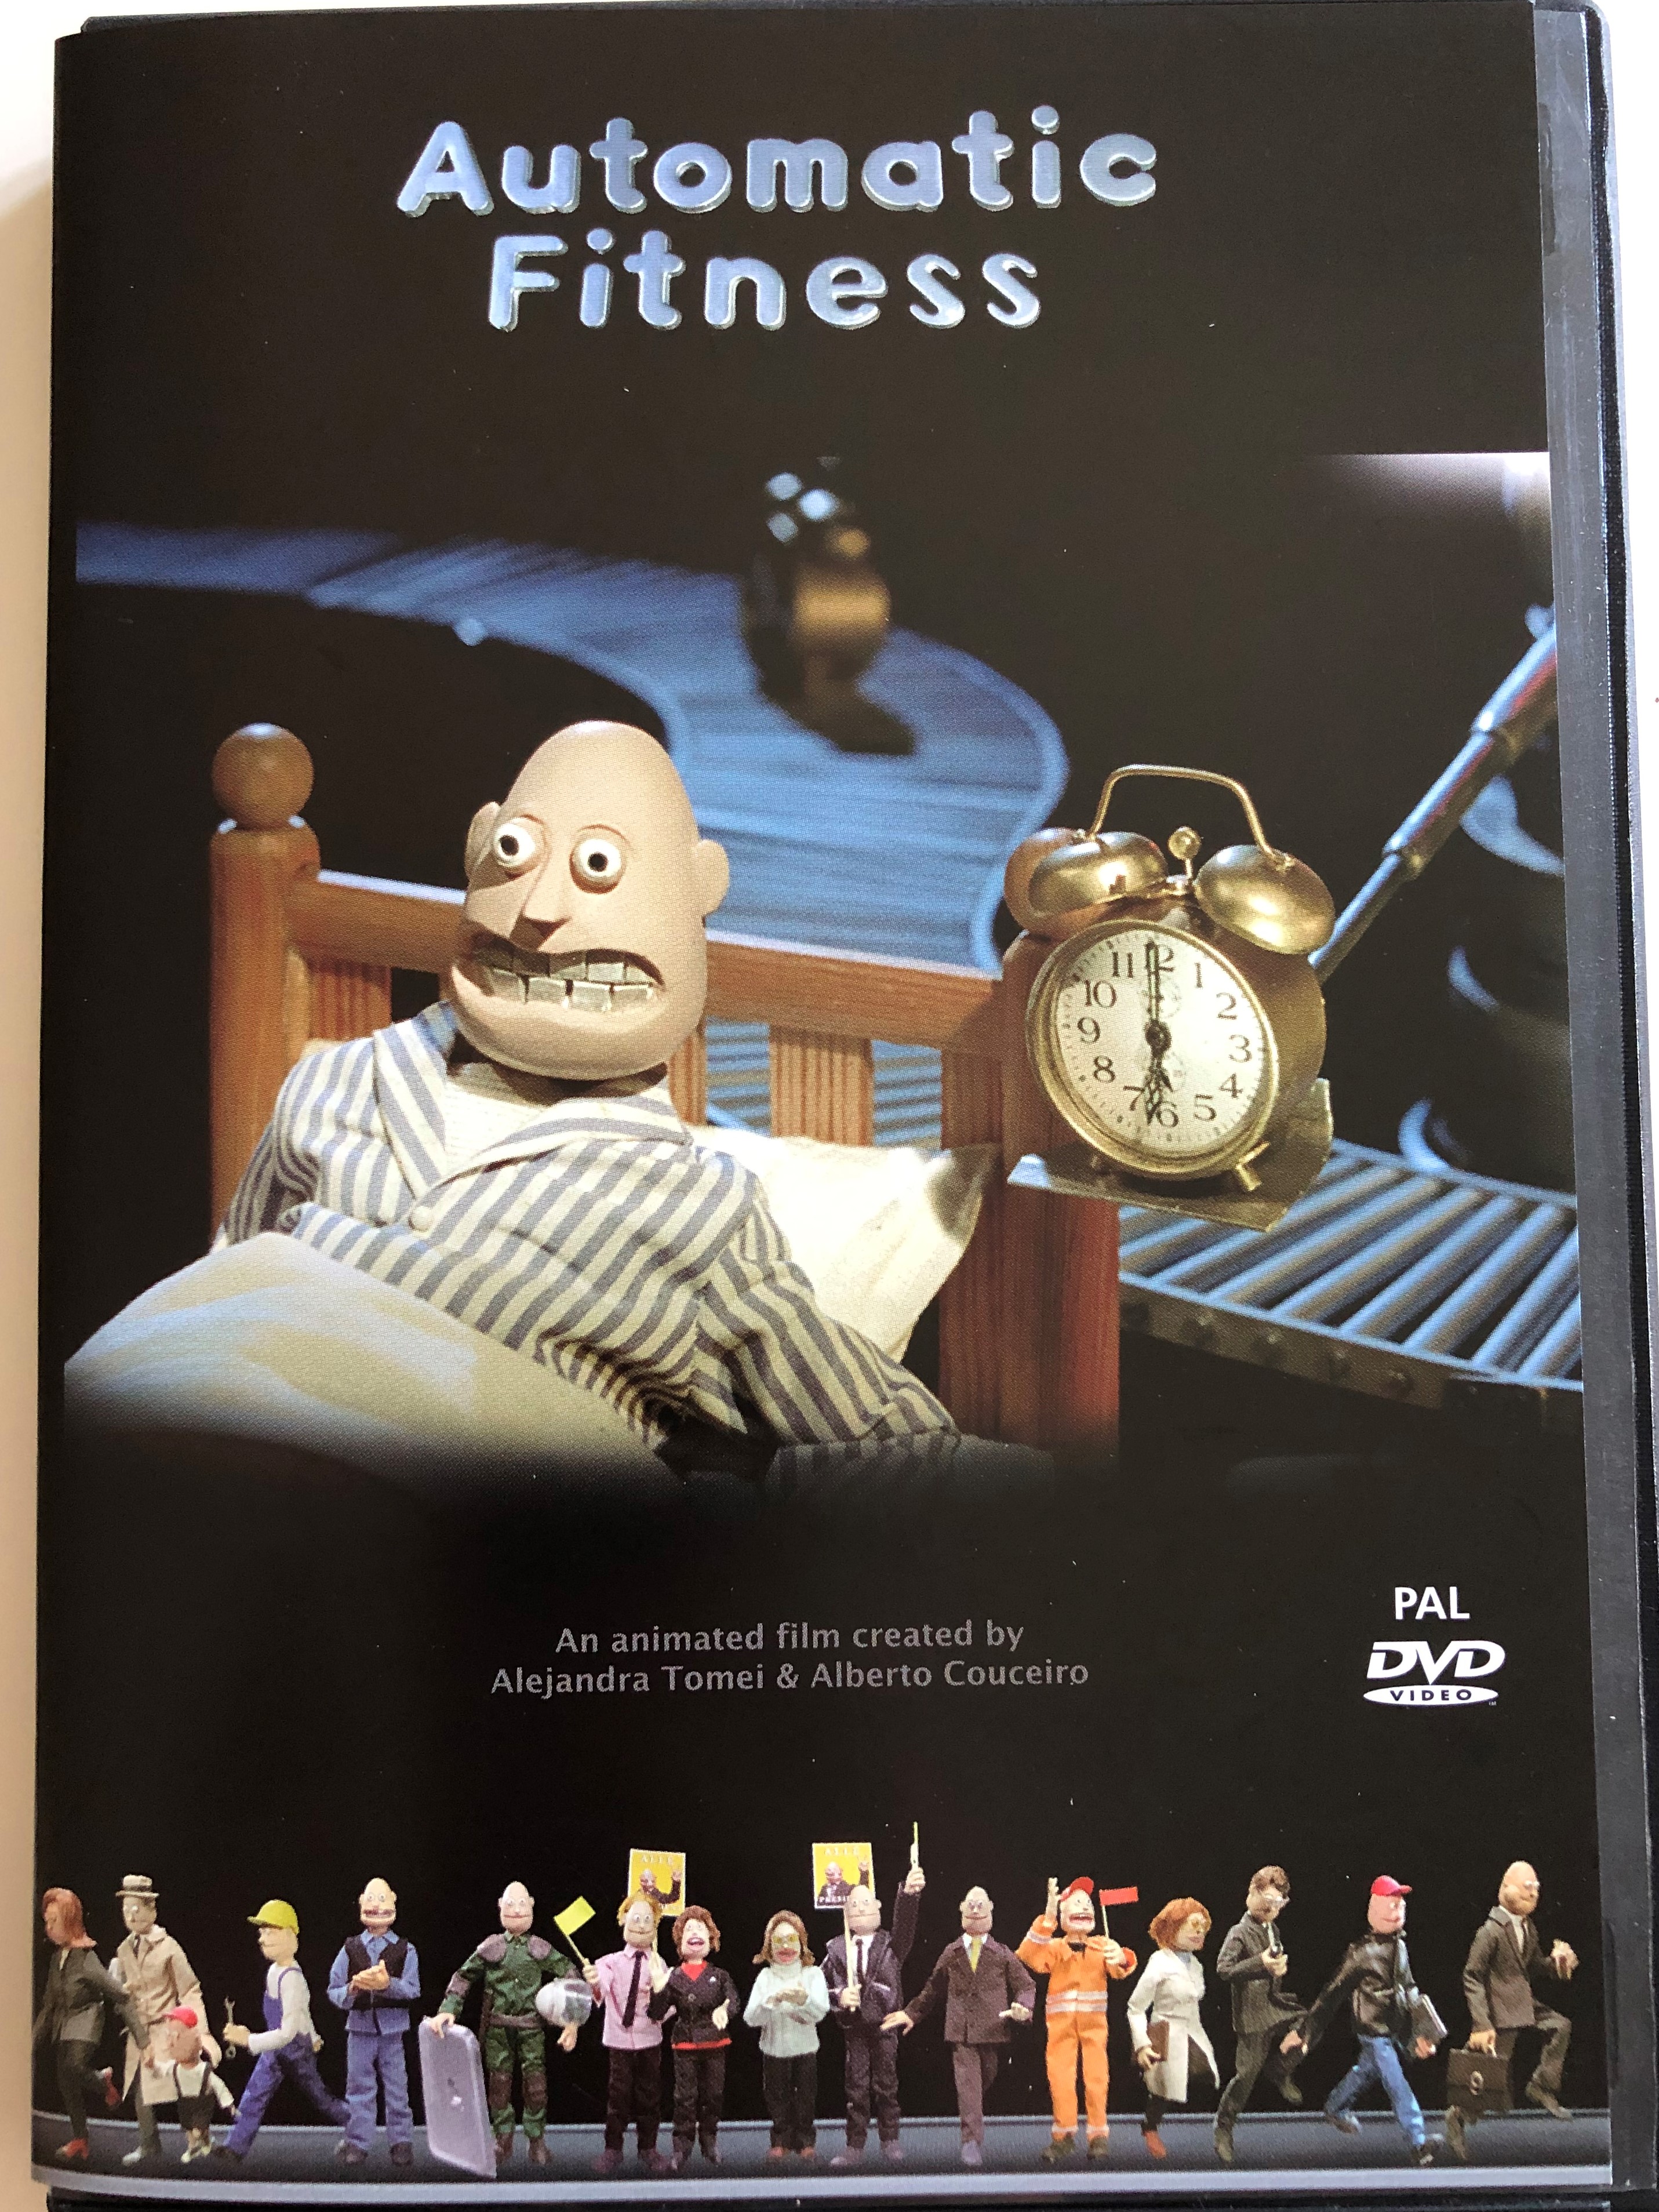 automatic-fitness-dvd-2015-created-by-alejandra-tomei-alberto-couceiro-a-stop-motion-animated-movie-on-the-human-automatism-1-.jpg